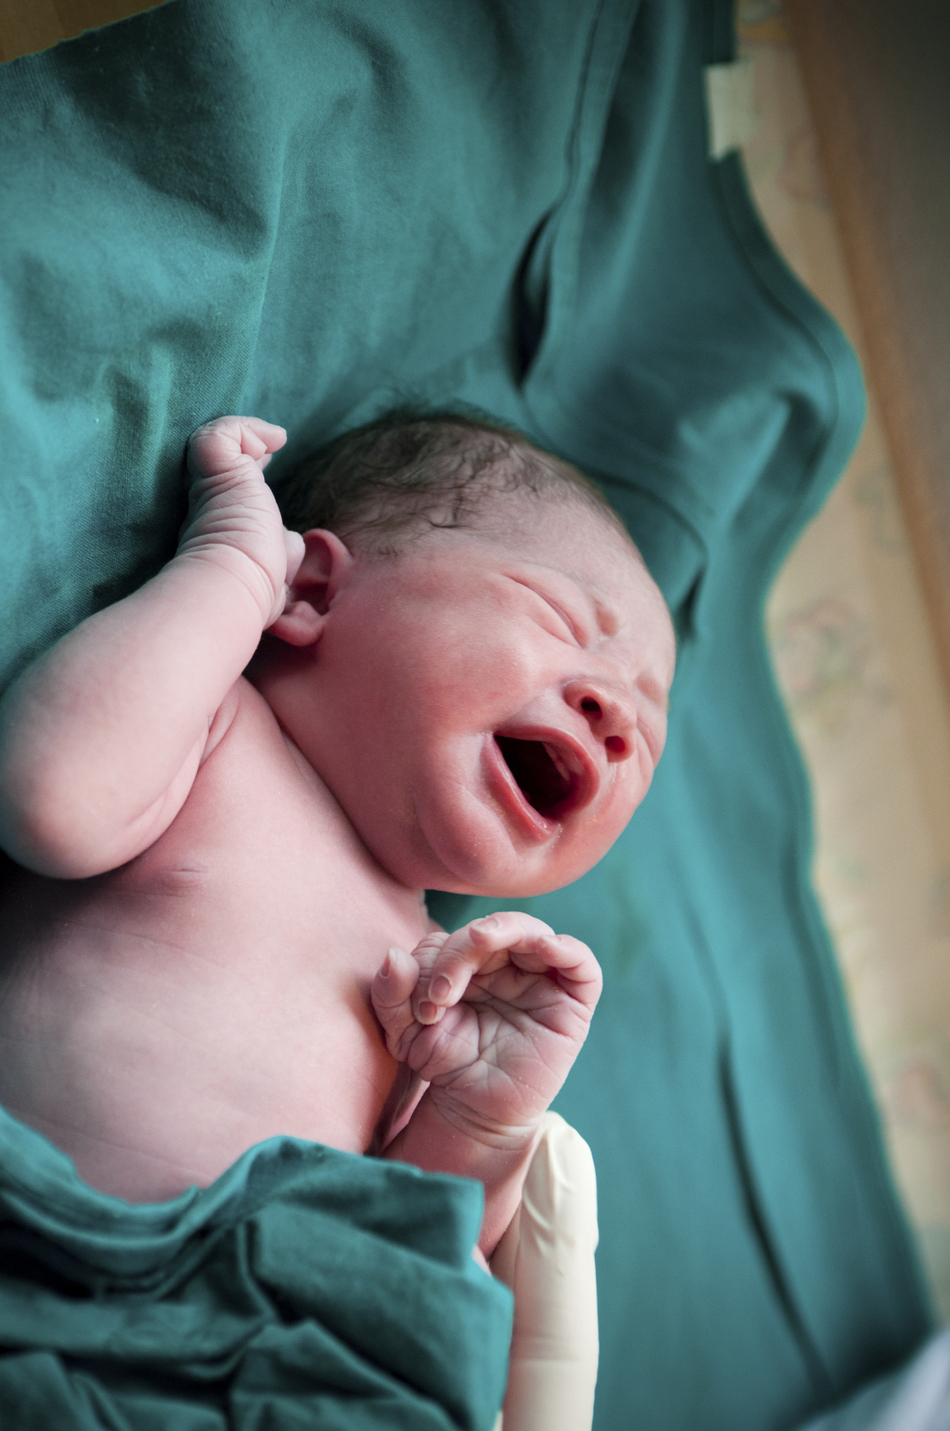 C-Section Babies’ Immune System May Be Improved by Vaginal Microbial Transfer